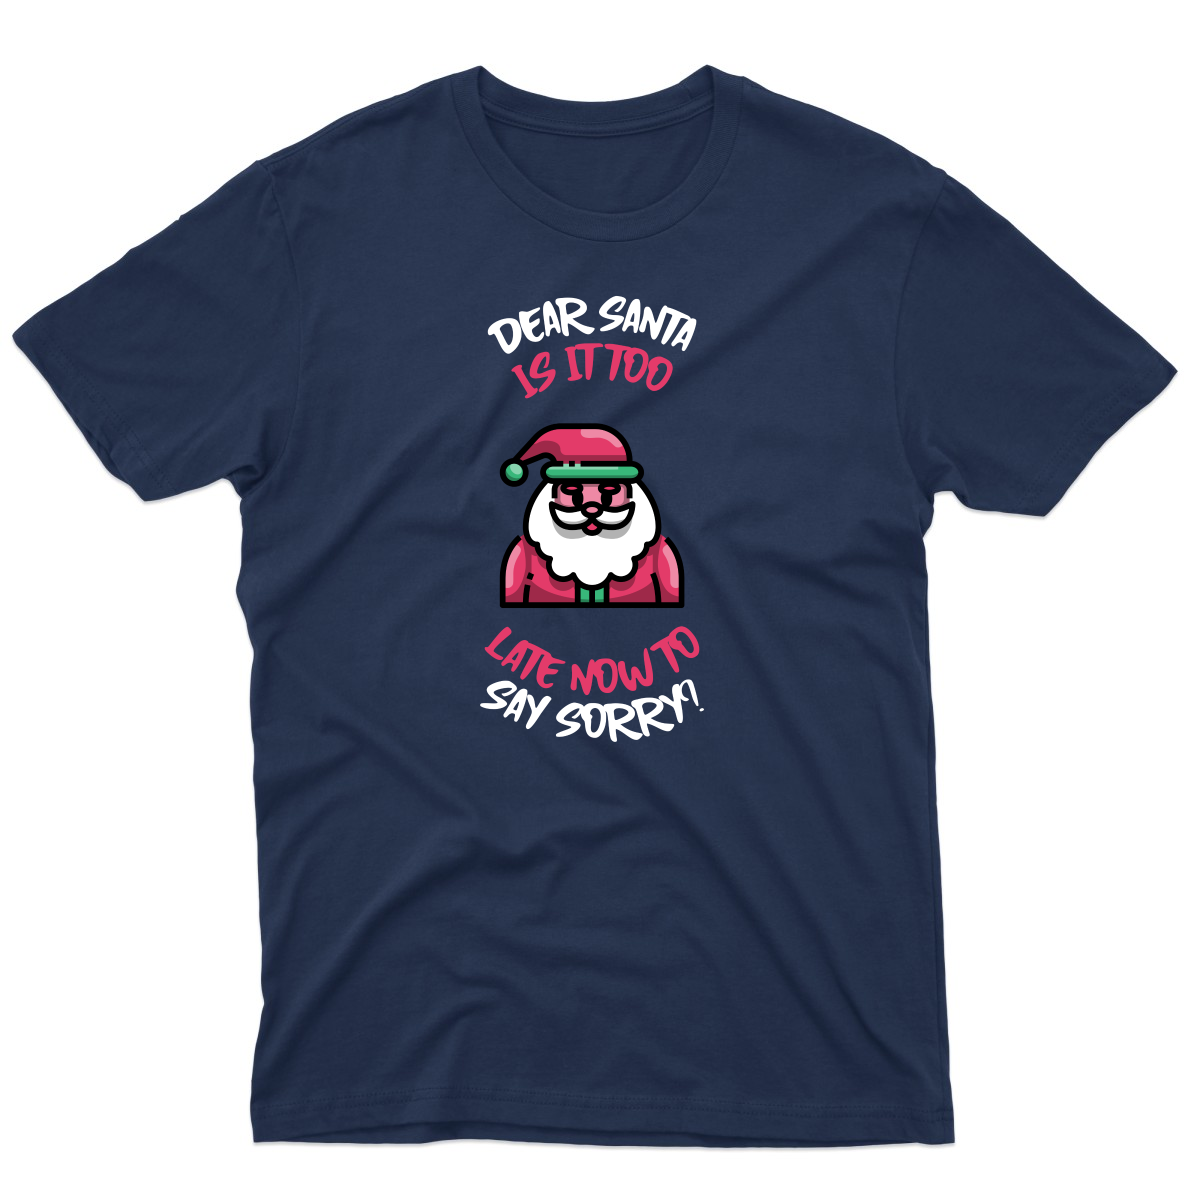 Dear Santa, Is It Too Late to Say Sorry? Men's T-shirt | Navy